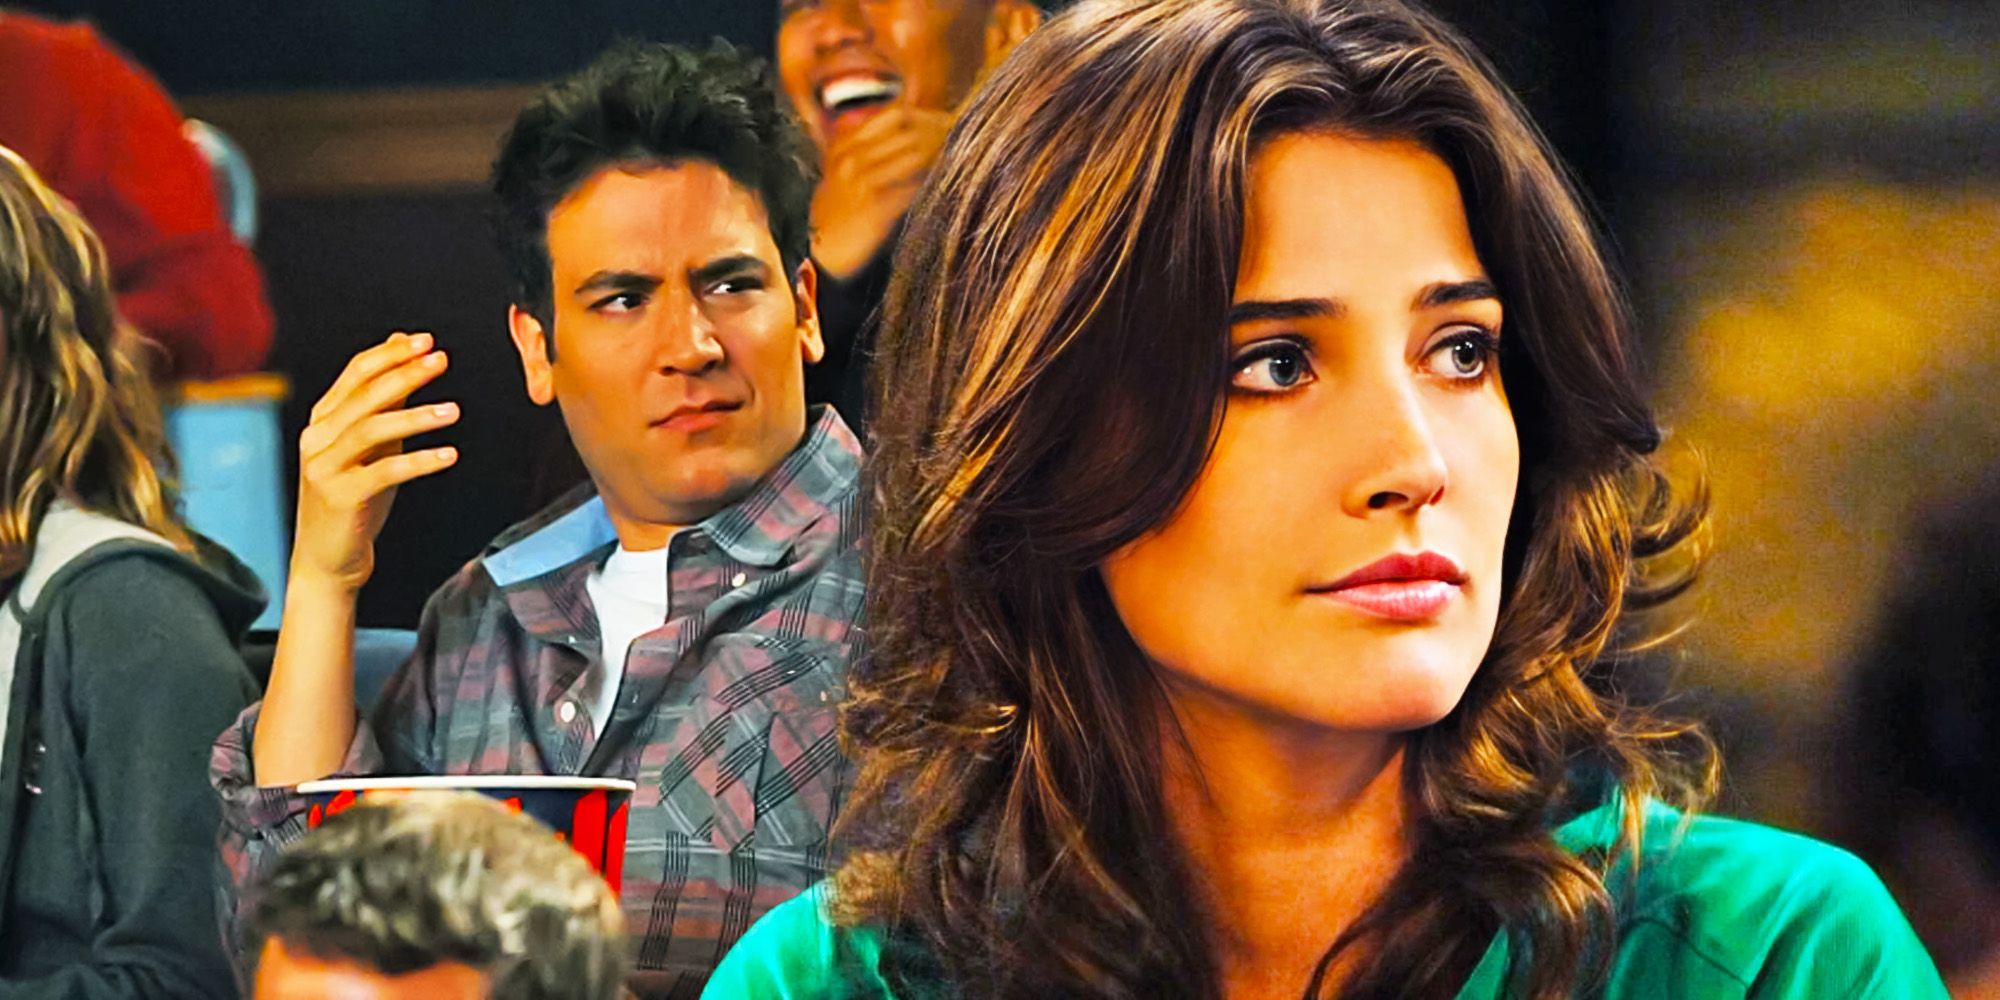 Composite image of Ted and Robin in HIMYM